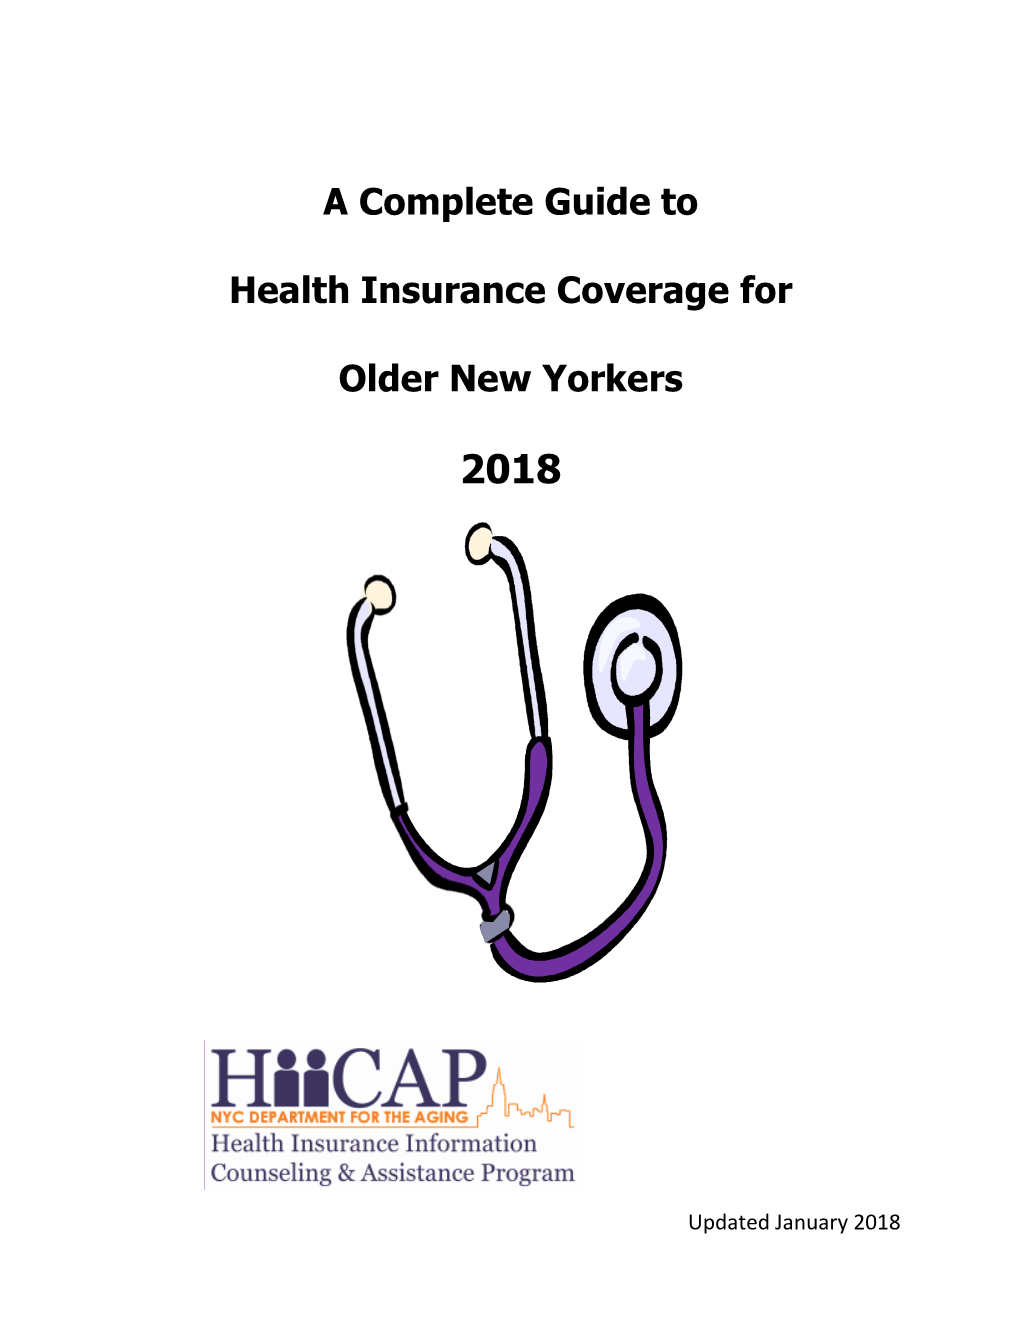 A Complete Guide to Health Insurance Coverage for Older New Yorkers